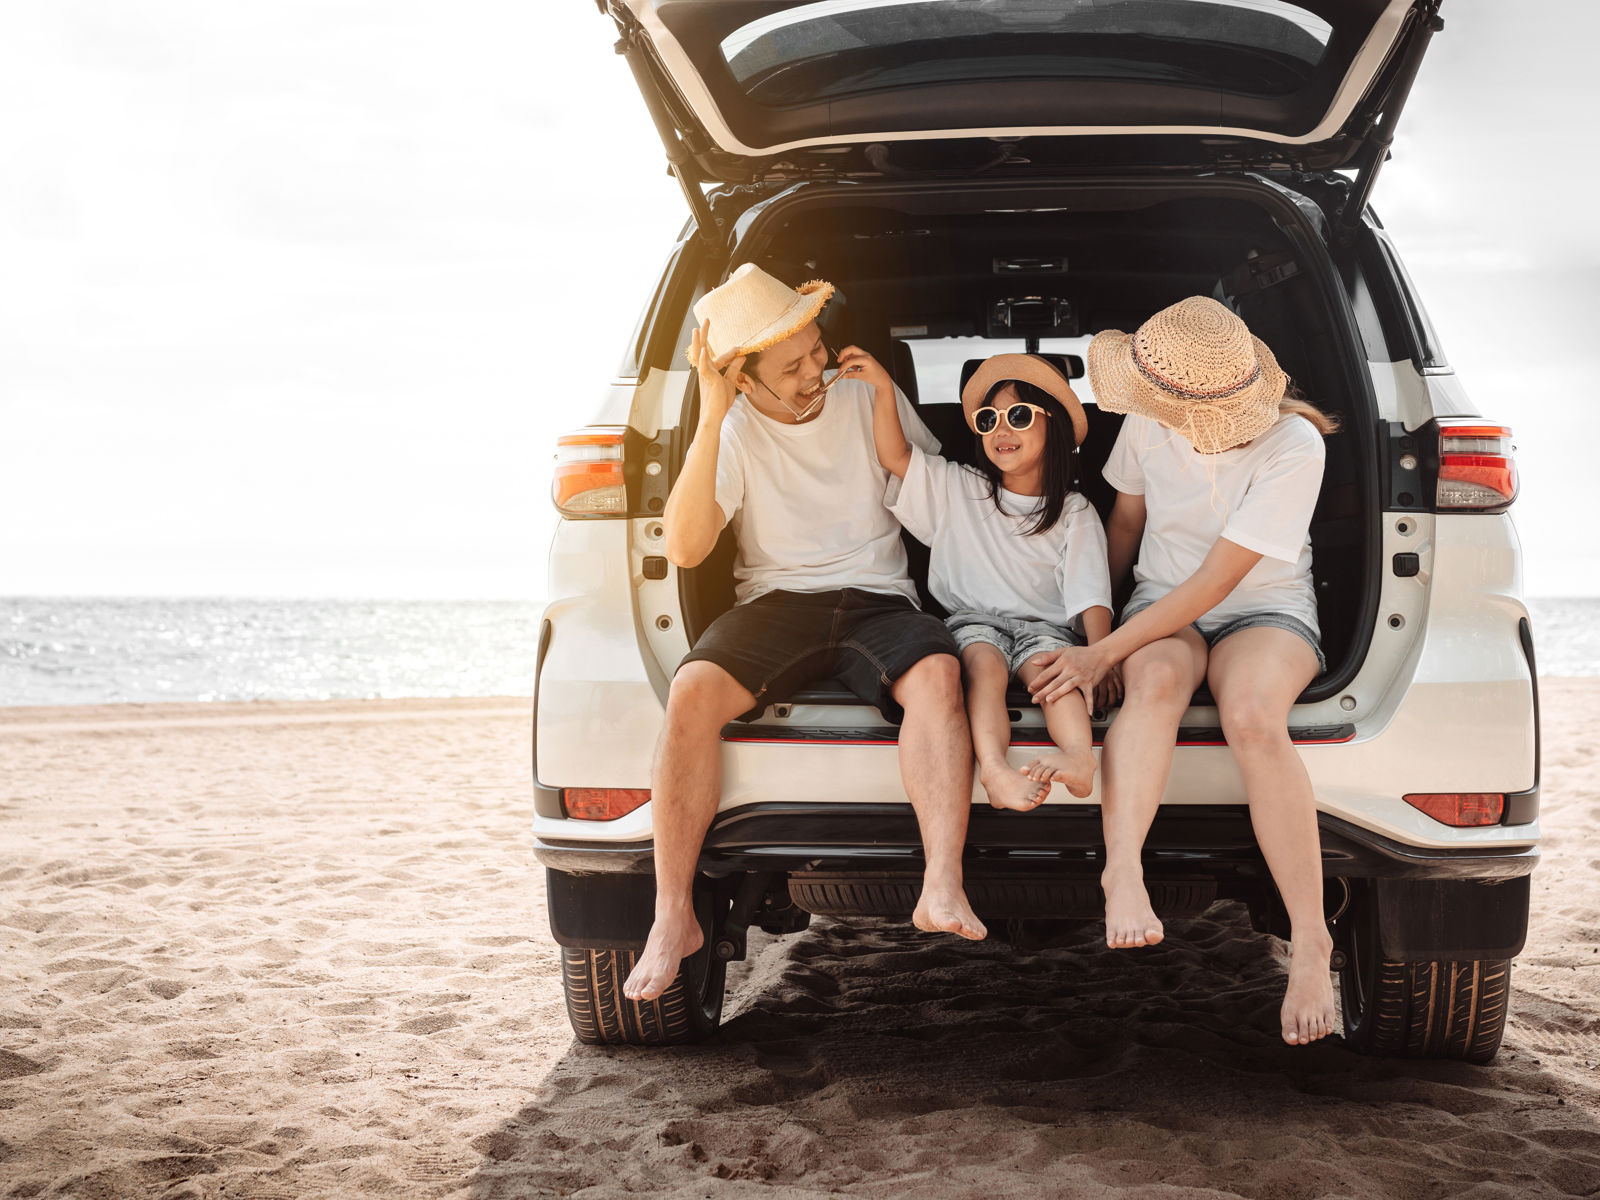 Compare travel insurance - Three people sitting in the trunk of an SUV by the beach, wearing sun hats and enjoying the holiday.